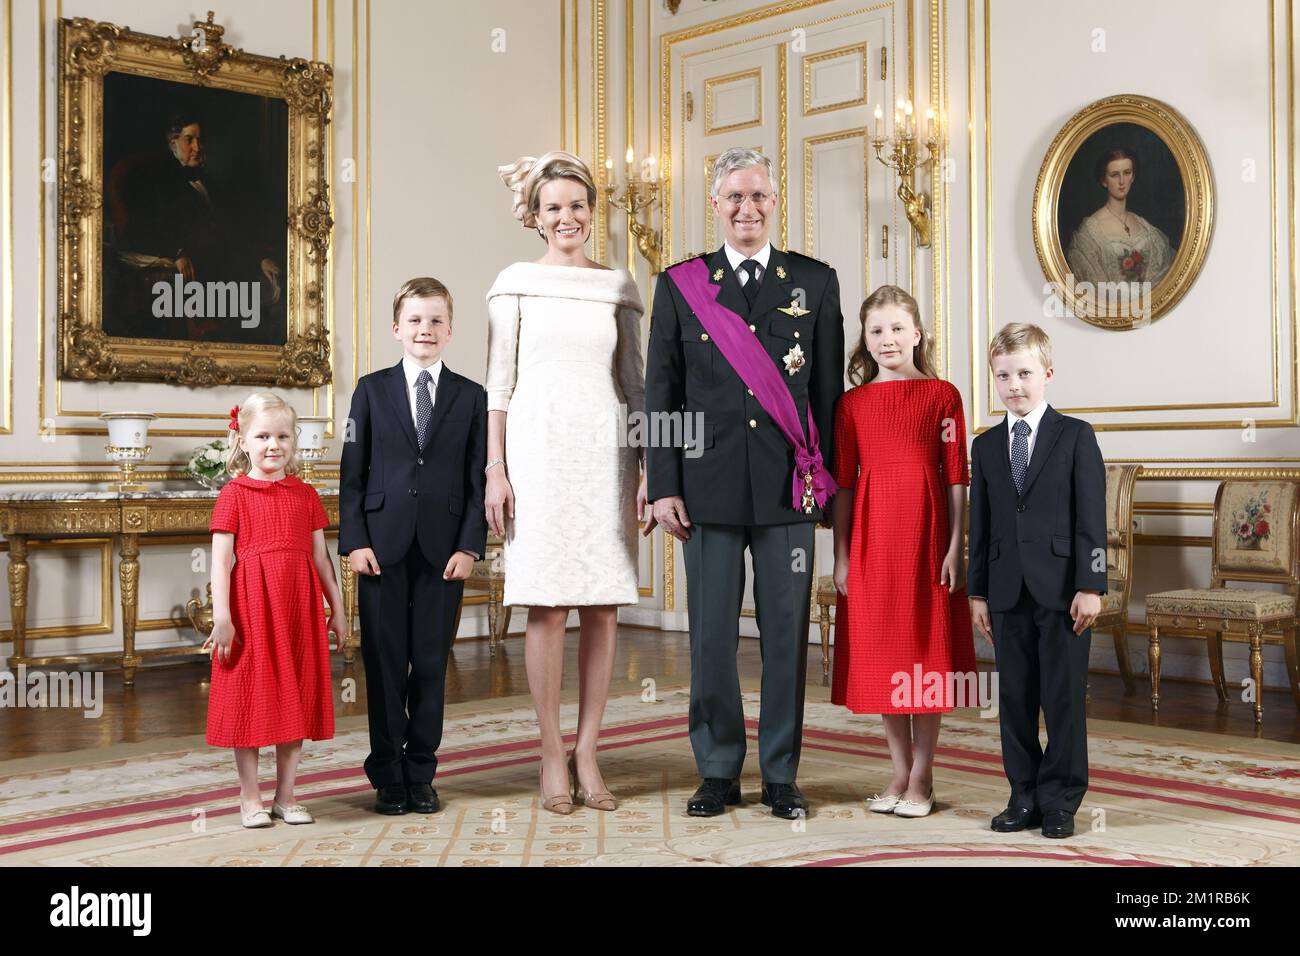 FOR EDITORIAL USE ONLY. NOT FOR SALE FOR MARKETING OR ADVERTISING CAMPAIGNS.  20130721 - BRUSSELS, BELGIUM: L-R, Princess Eleonore, Prince Gabriel, Queen Mathilde of Belgium, King Philippe - Filip of Belgium, Crowd Princess Elisabeth and Prince Emmanuel pose for the official picture at the Royal Palace (Koninklijk Paleis - Palais Royal) in Brussels on the Belgian National Day, Sunday 21 July 2013 in Brussels. Today King Albert II abdicated the throne in favour of his son, the new King Philippe - Filip. Stock Photo